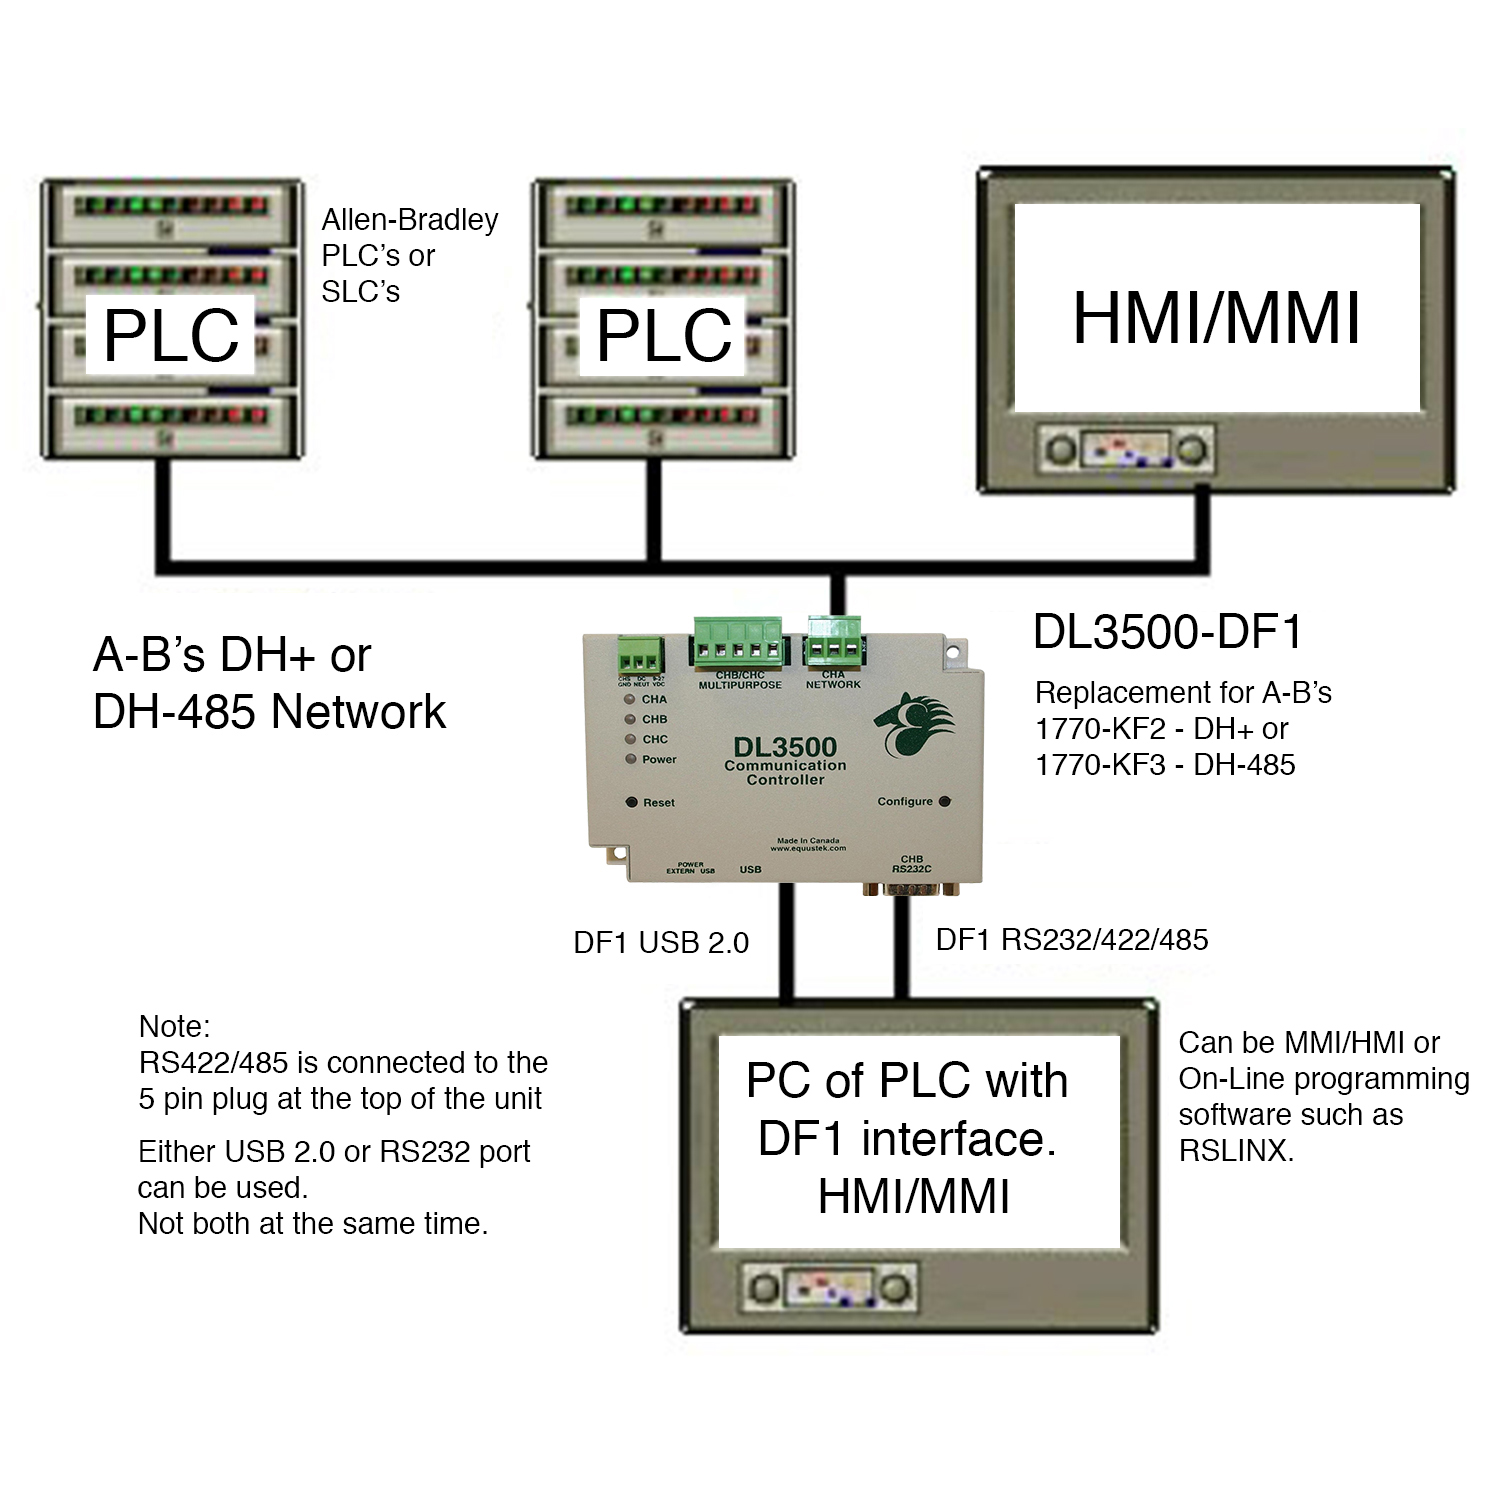 PLC and HMI/MMI feed in to the DL3500 which can output to online programming software. Use either USB 2.0 or RS232 port.